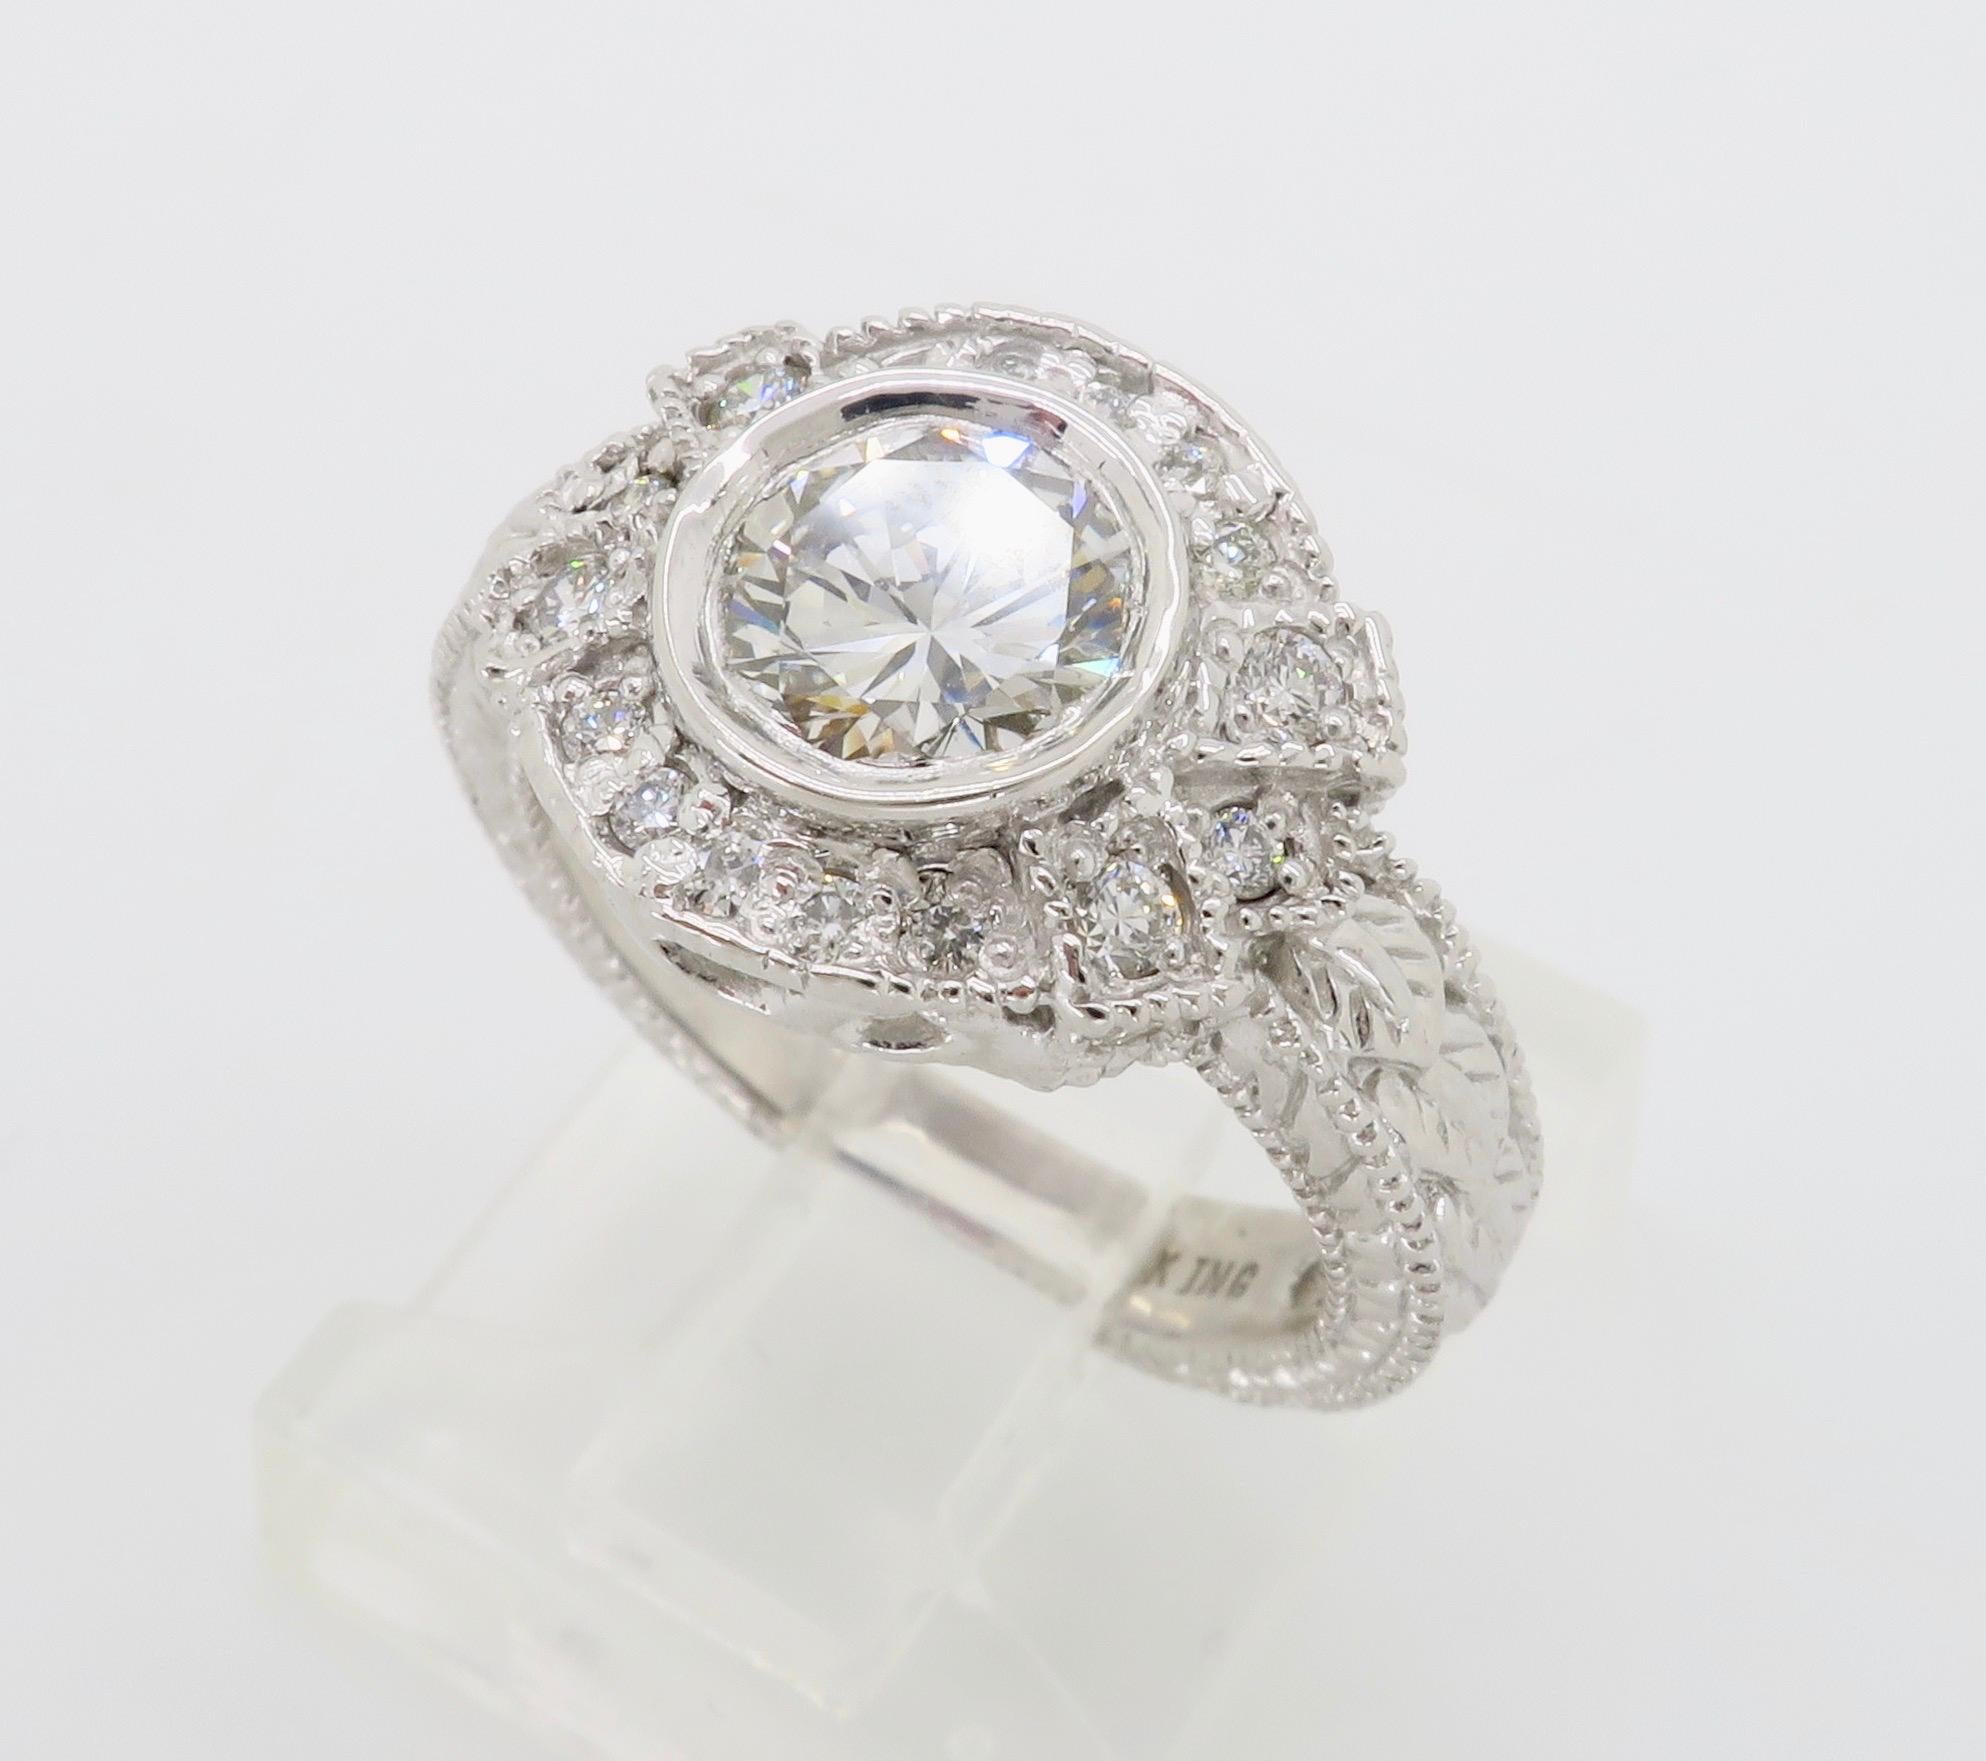 Highly detailed vintage inspired diamond ring with approximately 1.27ctw of Round Brilliant cut diamonds. 

Center Diamond Carat Weight: Approximately .92CT
Center Diamond Cut: Round Brilliant Cut
Center Diamond Color: I-J
Center Diamond Clarity: